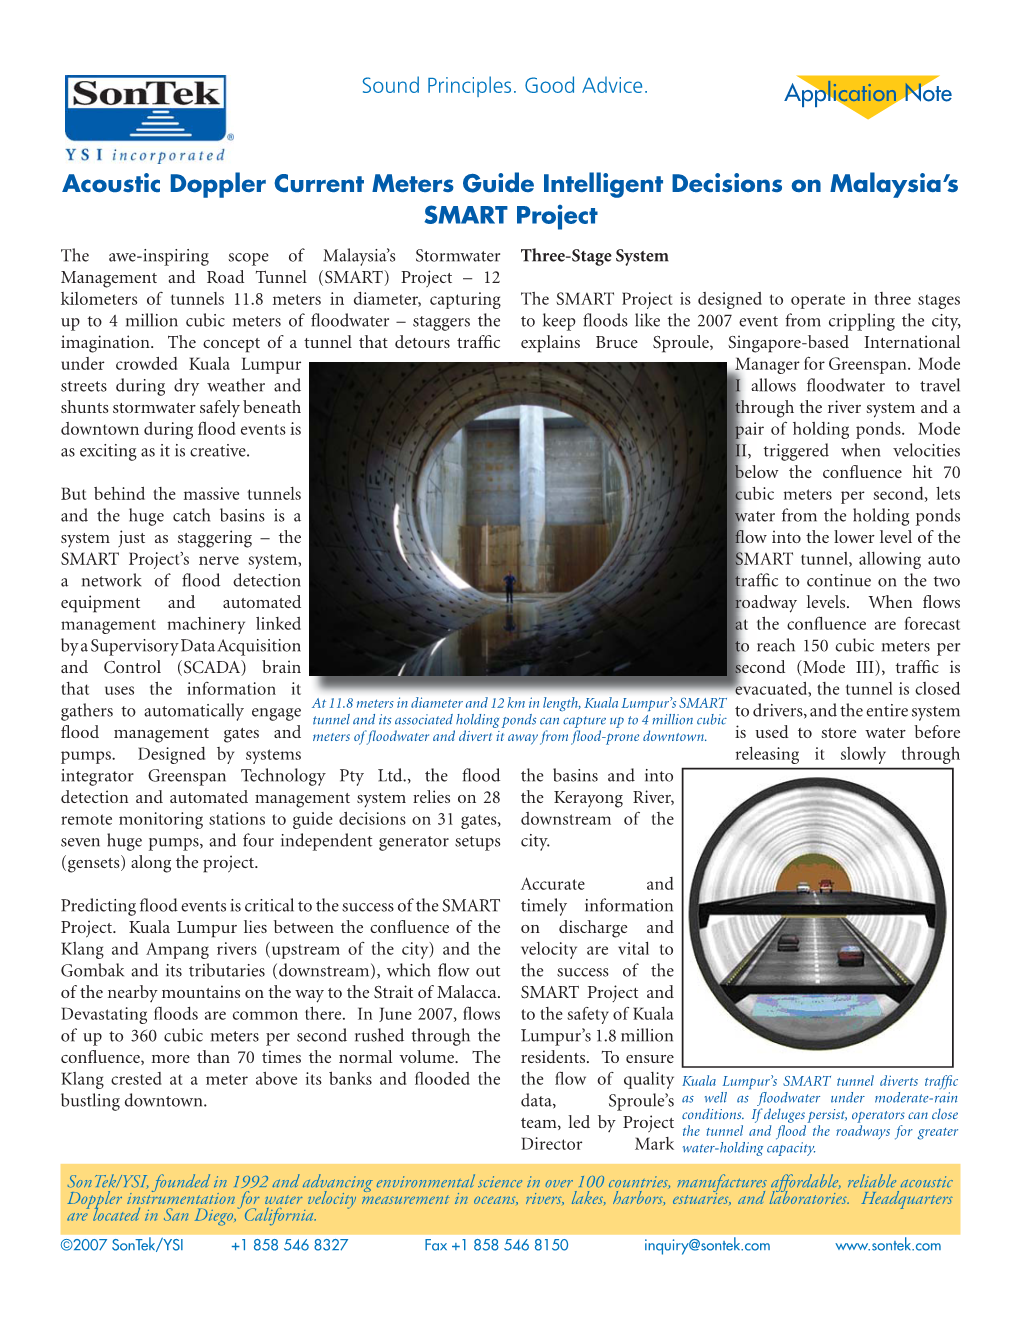 Acoustic Doppler Current Meters Guide Intelligent Decisions on Malaysia's SMART Project